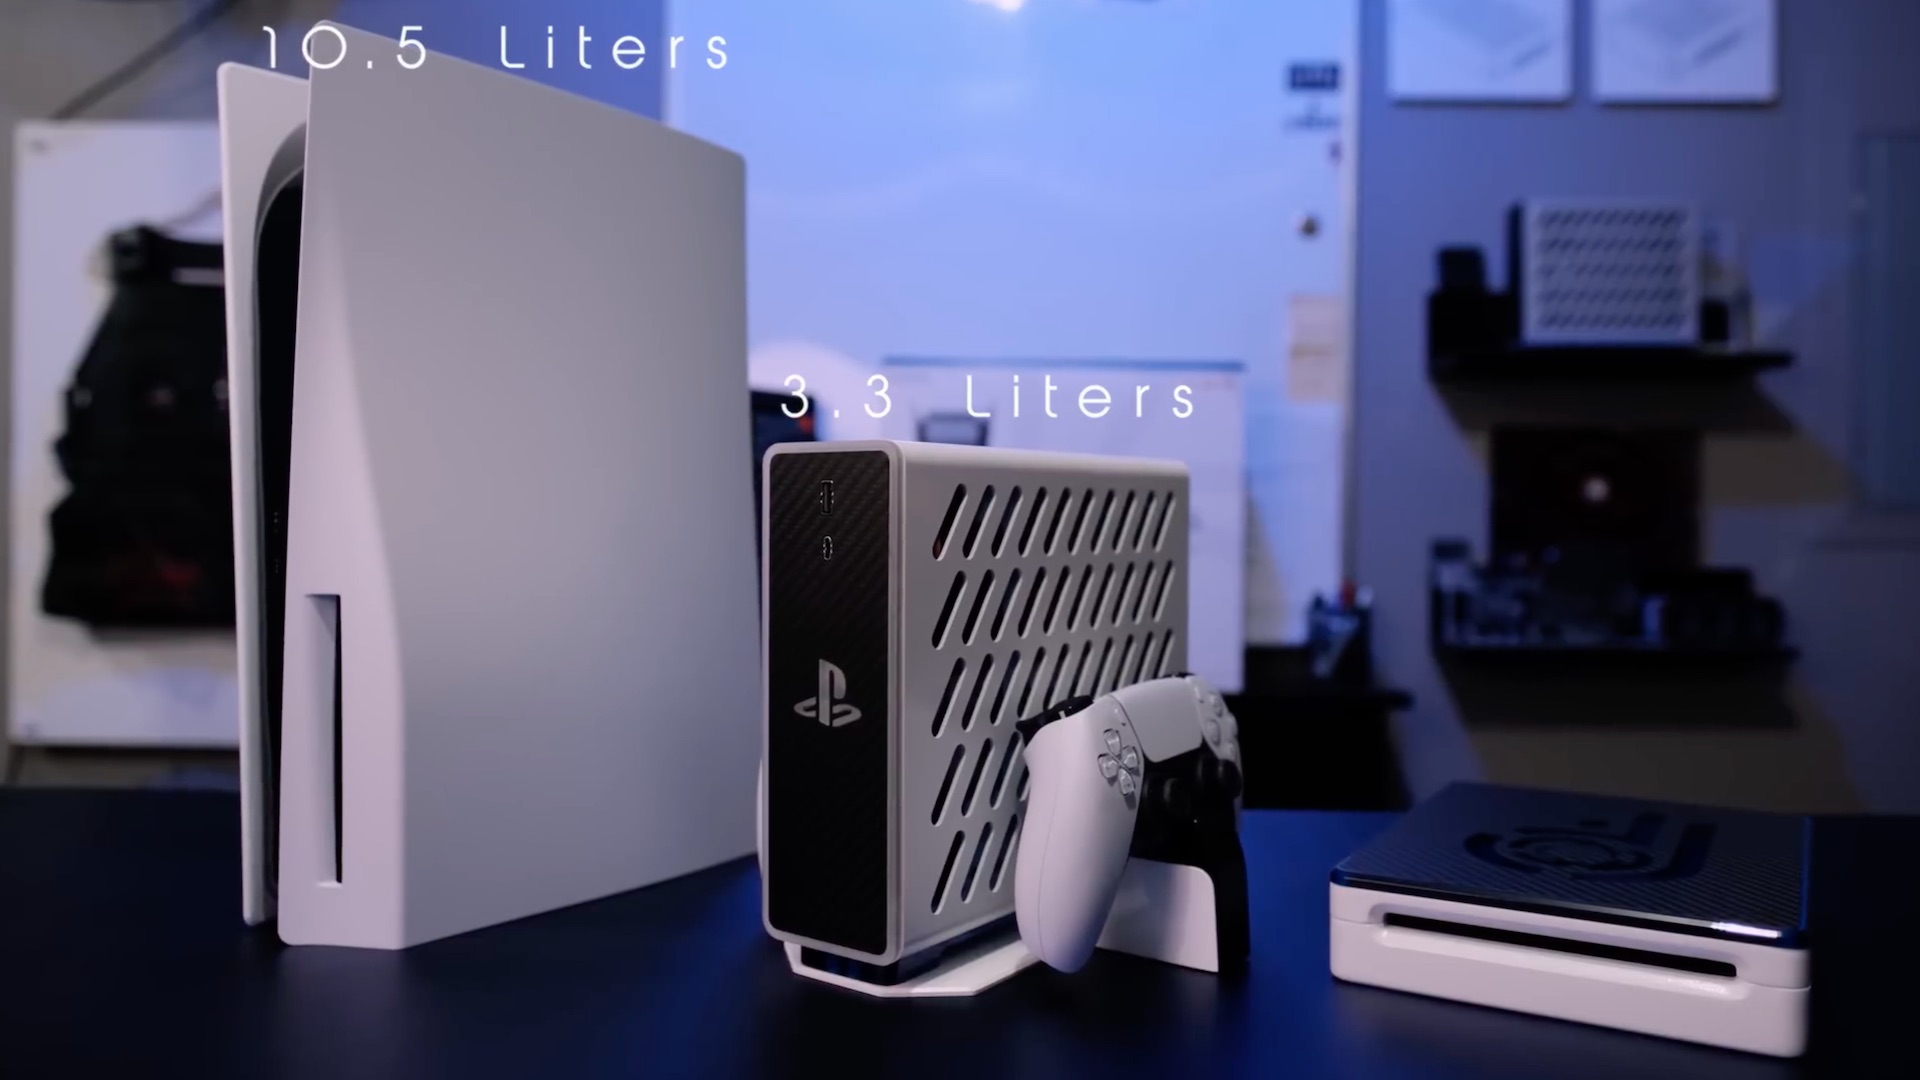 You Might Want To Think Twice Before Buying A PS5 Slim